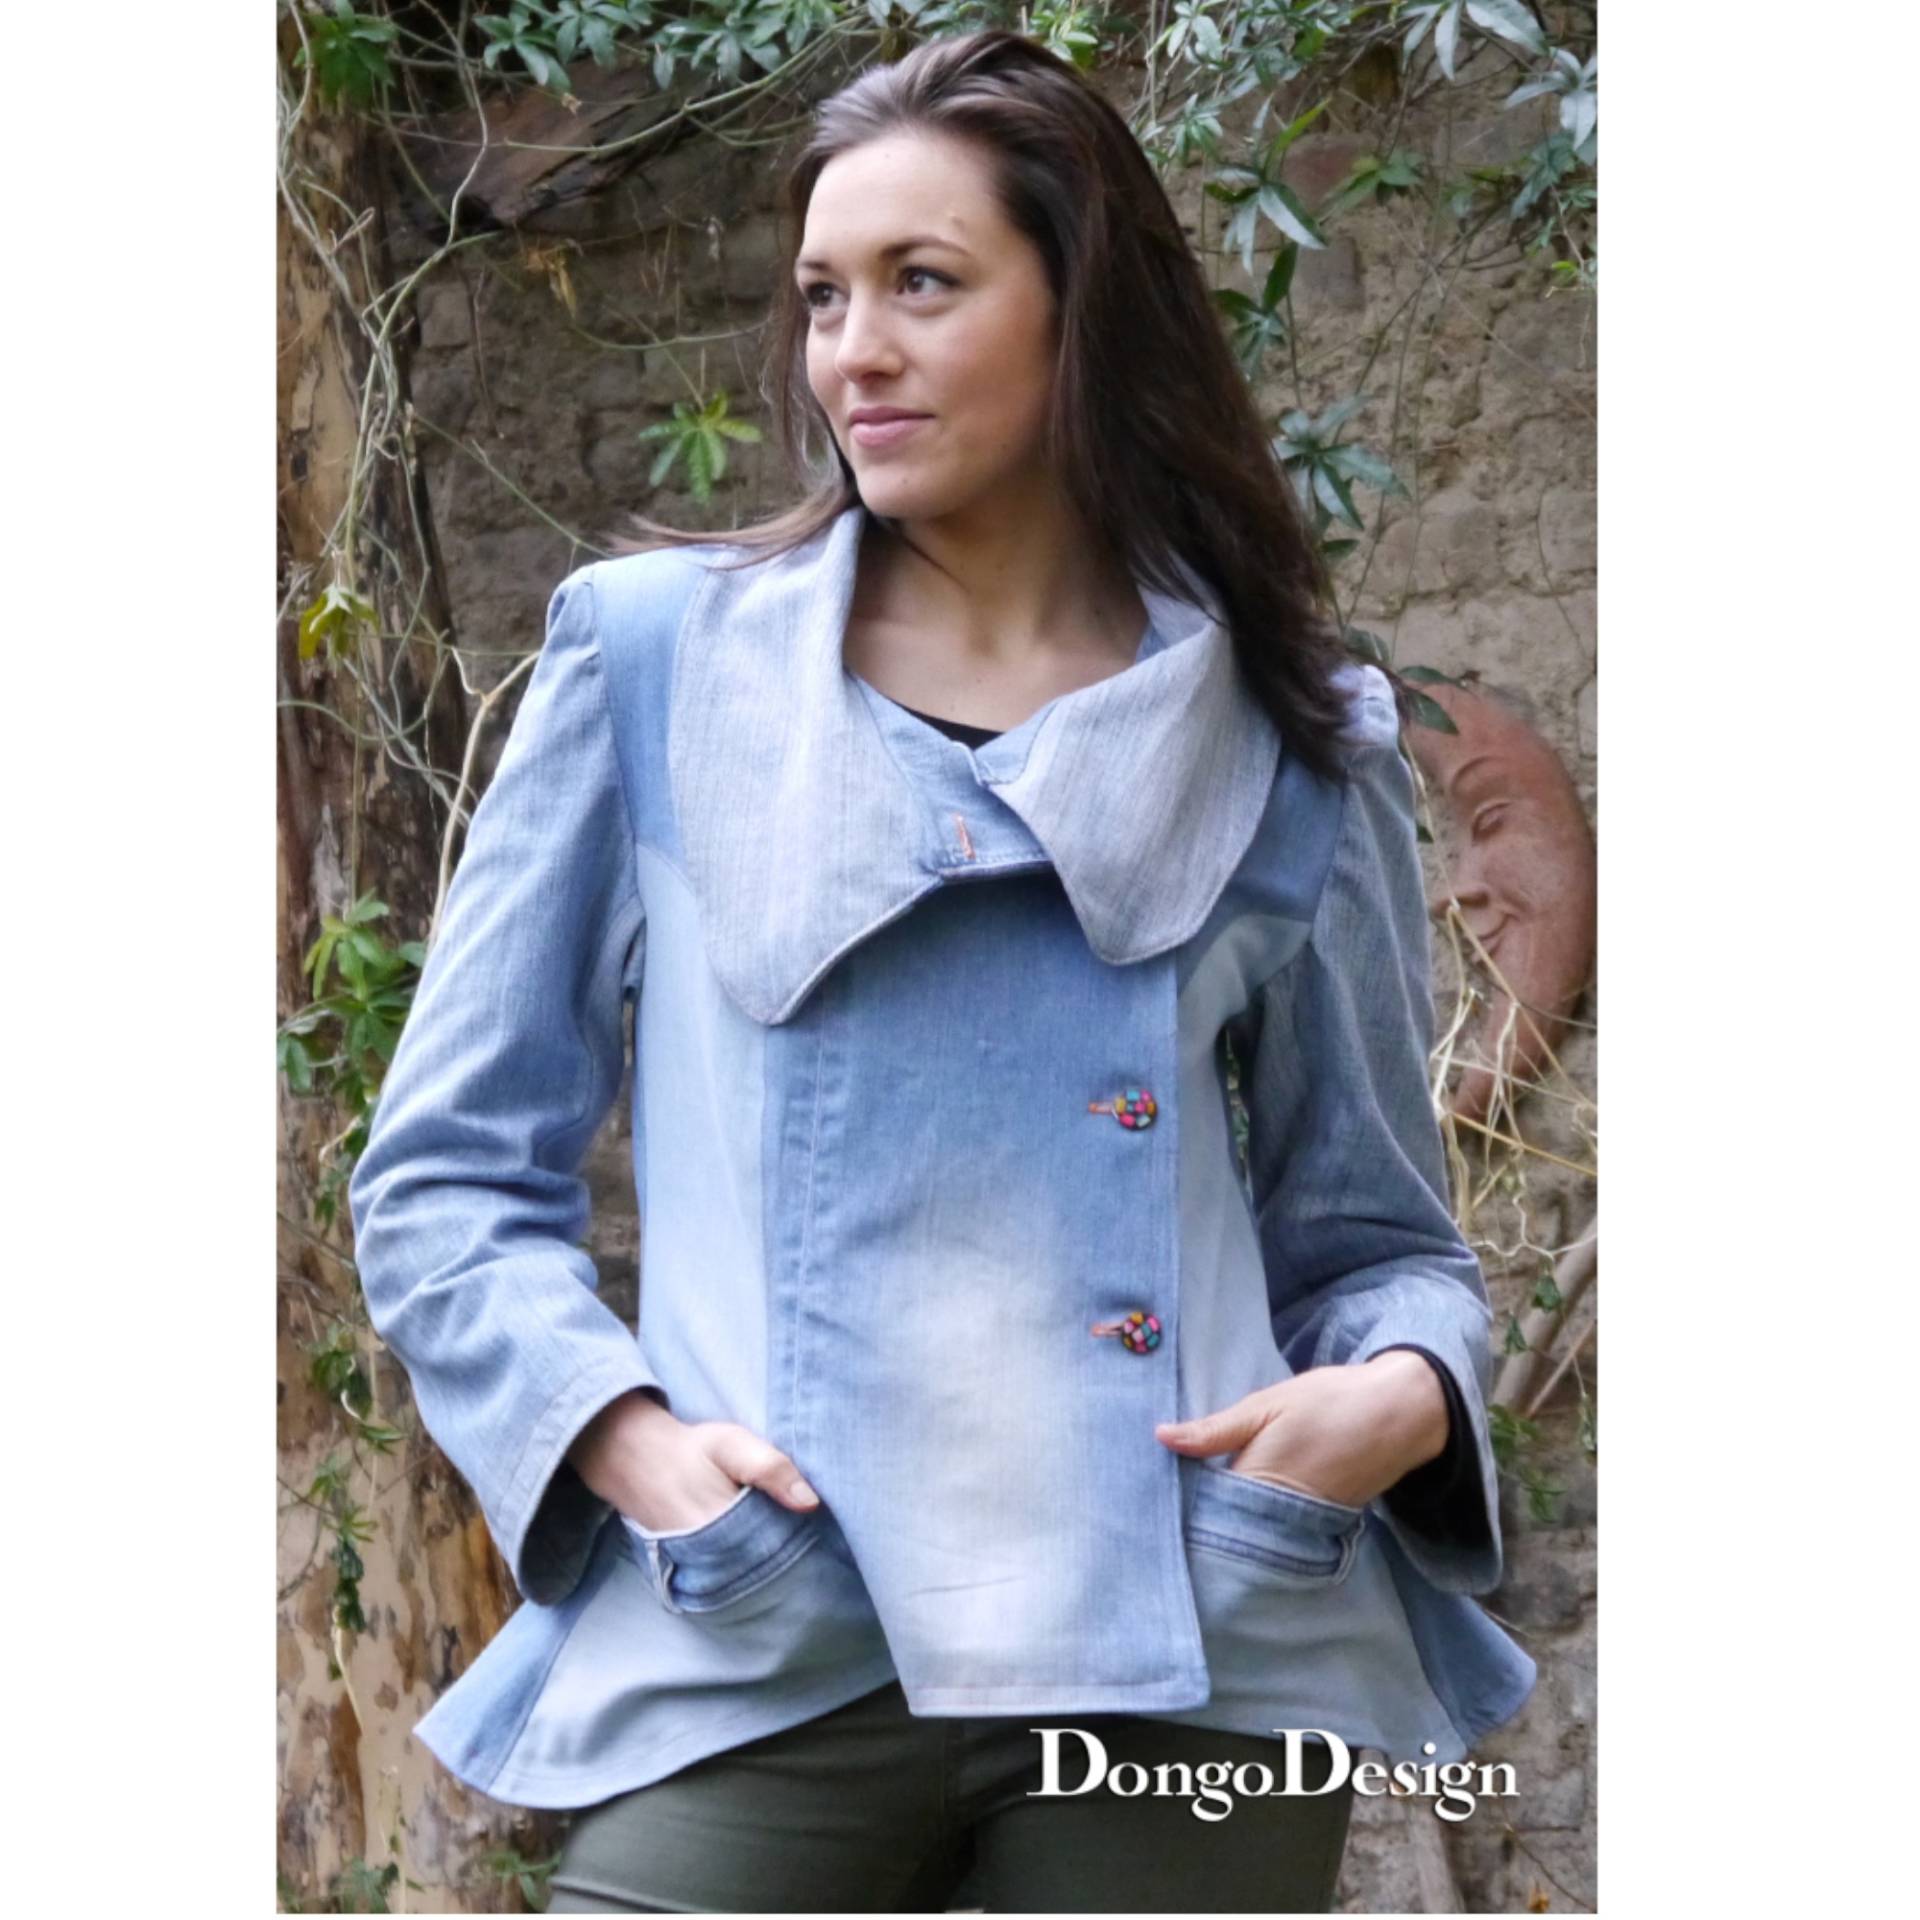 E-Book DongoDesign Damen-Upcycling Jeansjacke von Stoffe Hemmers